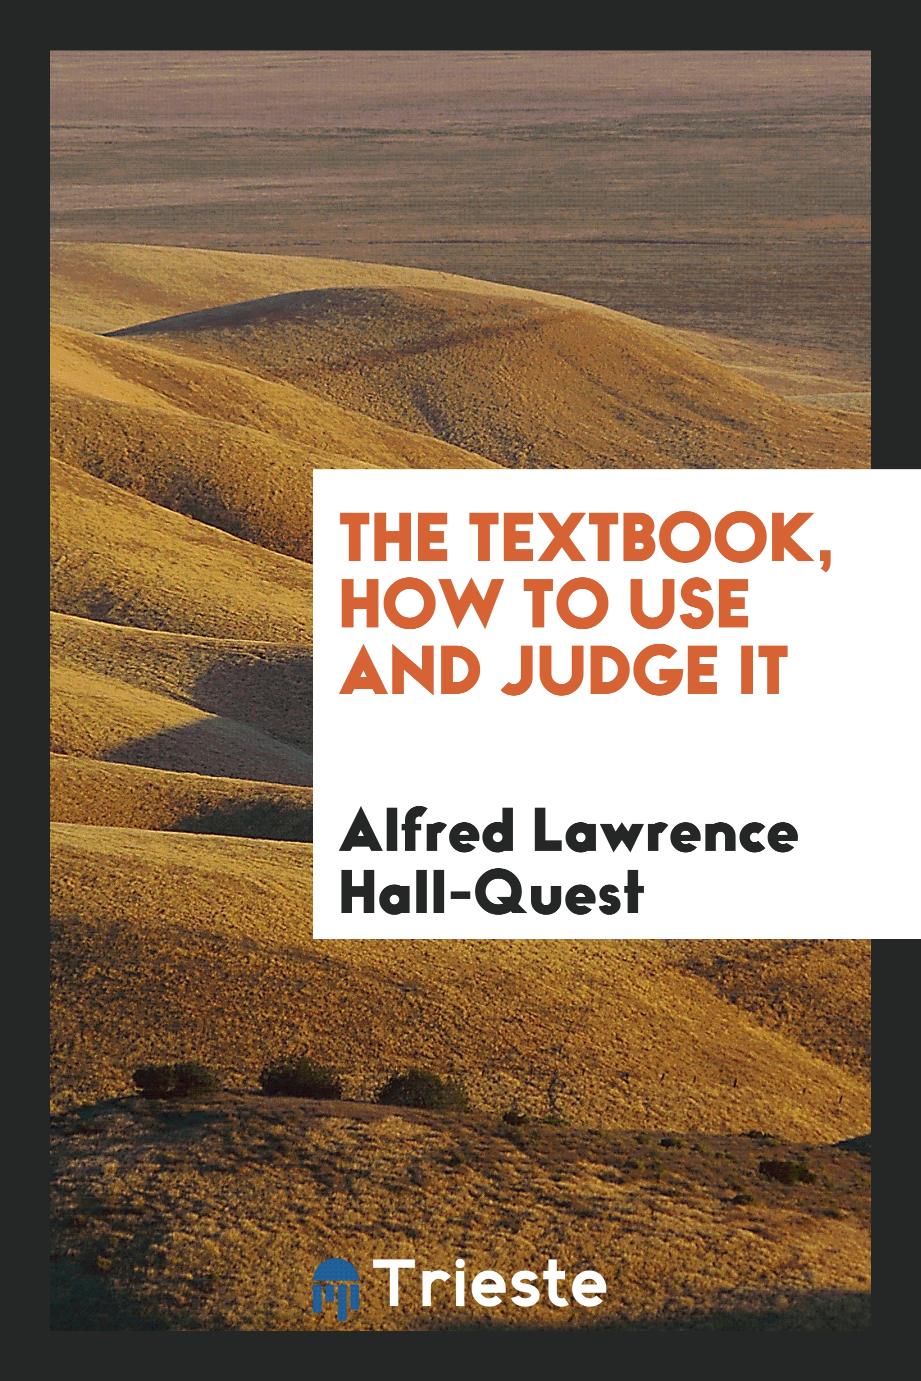 The textbook, how to use and judge it